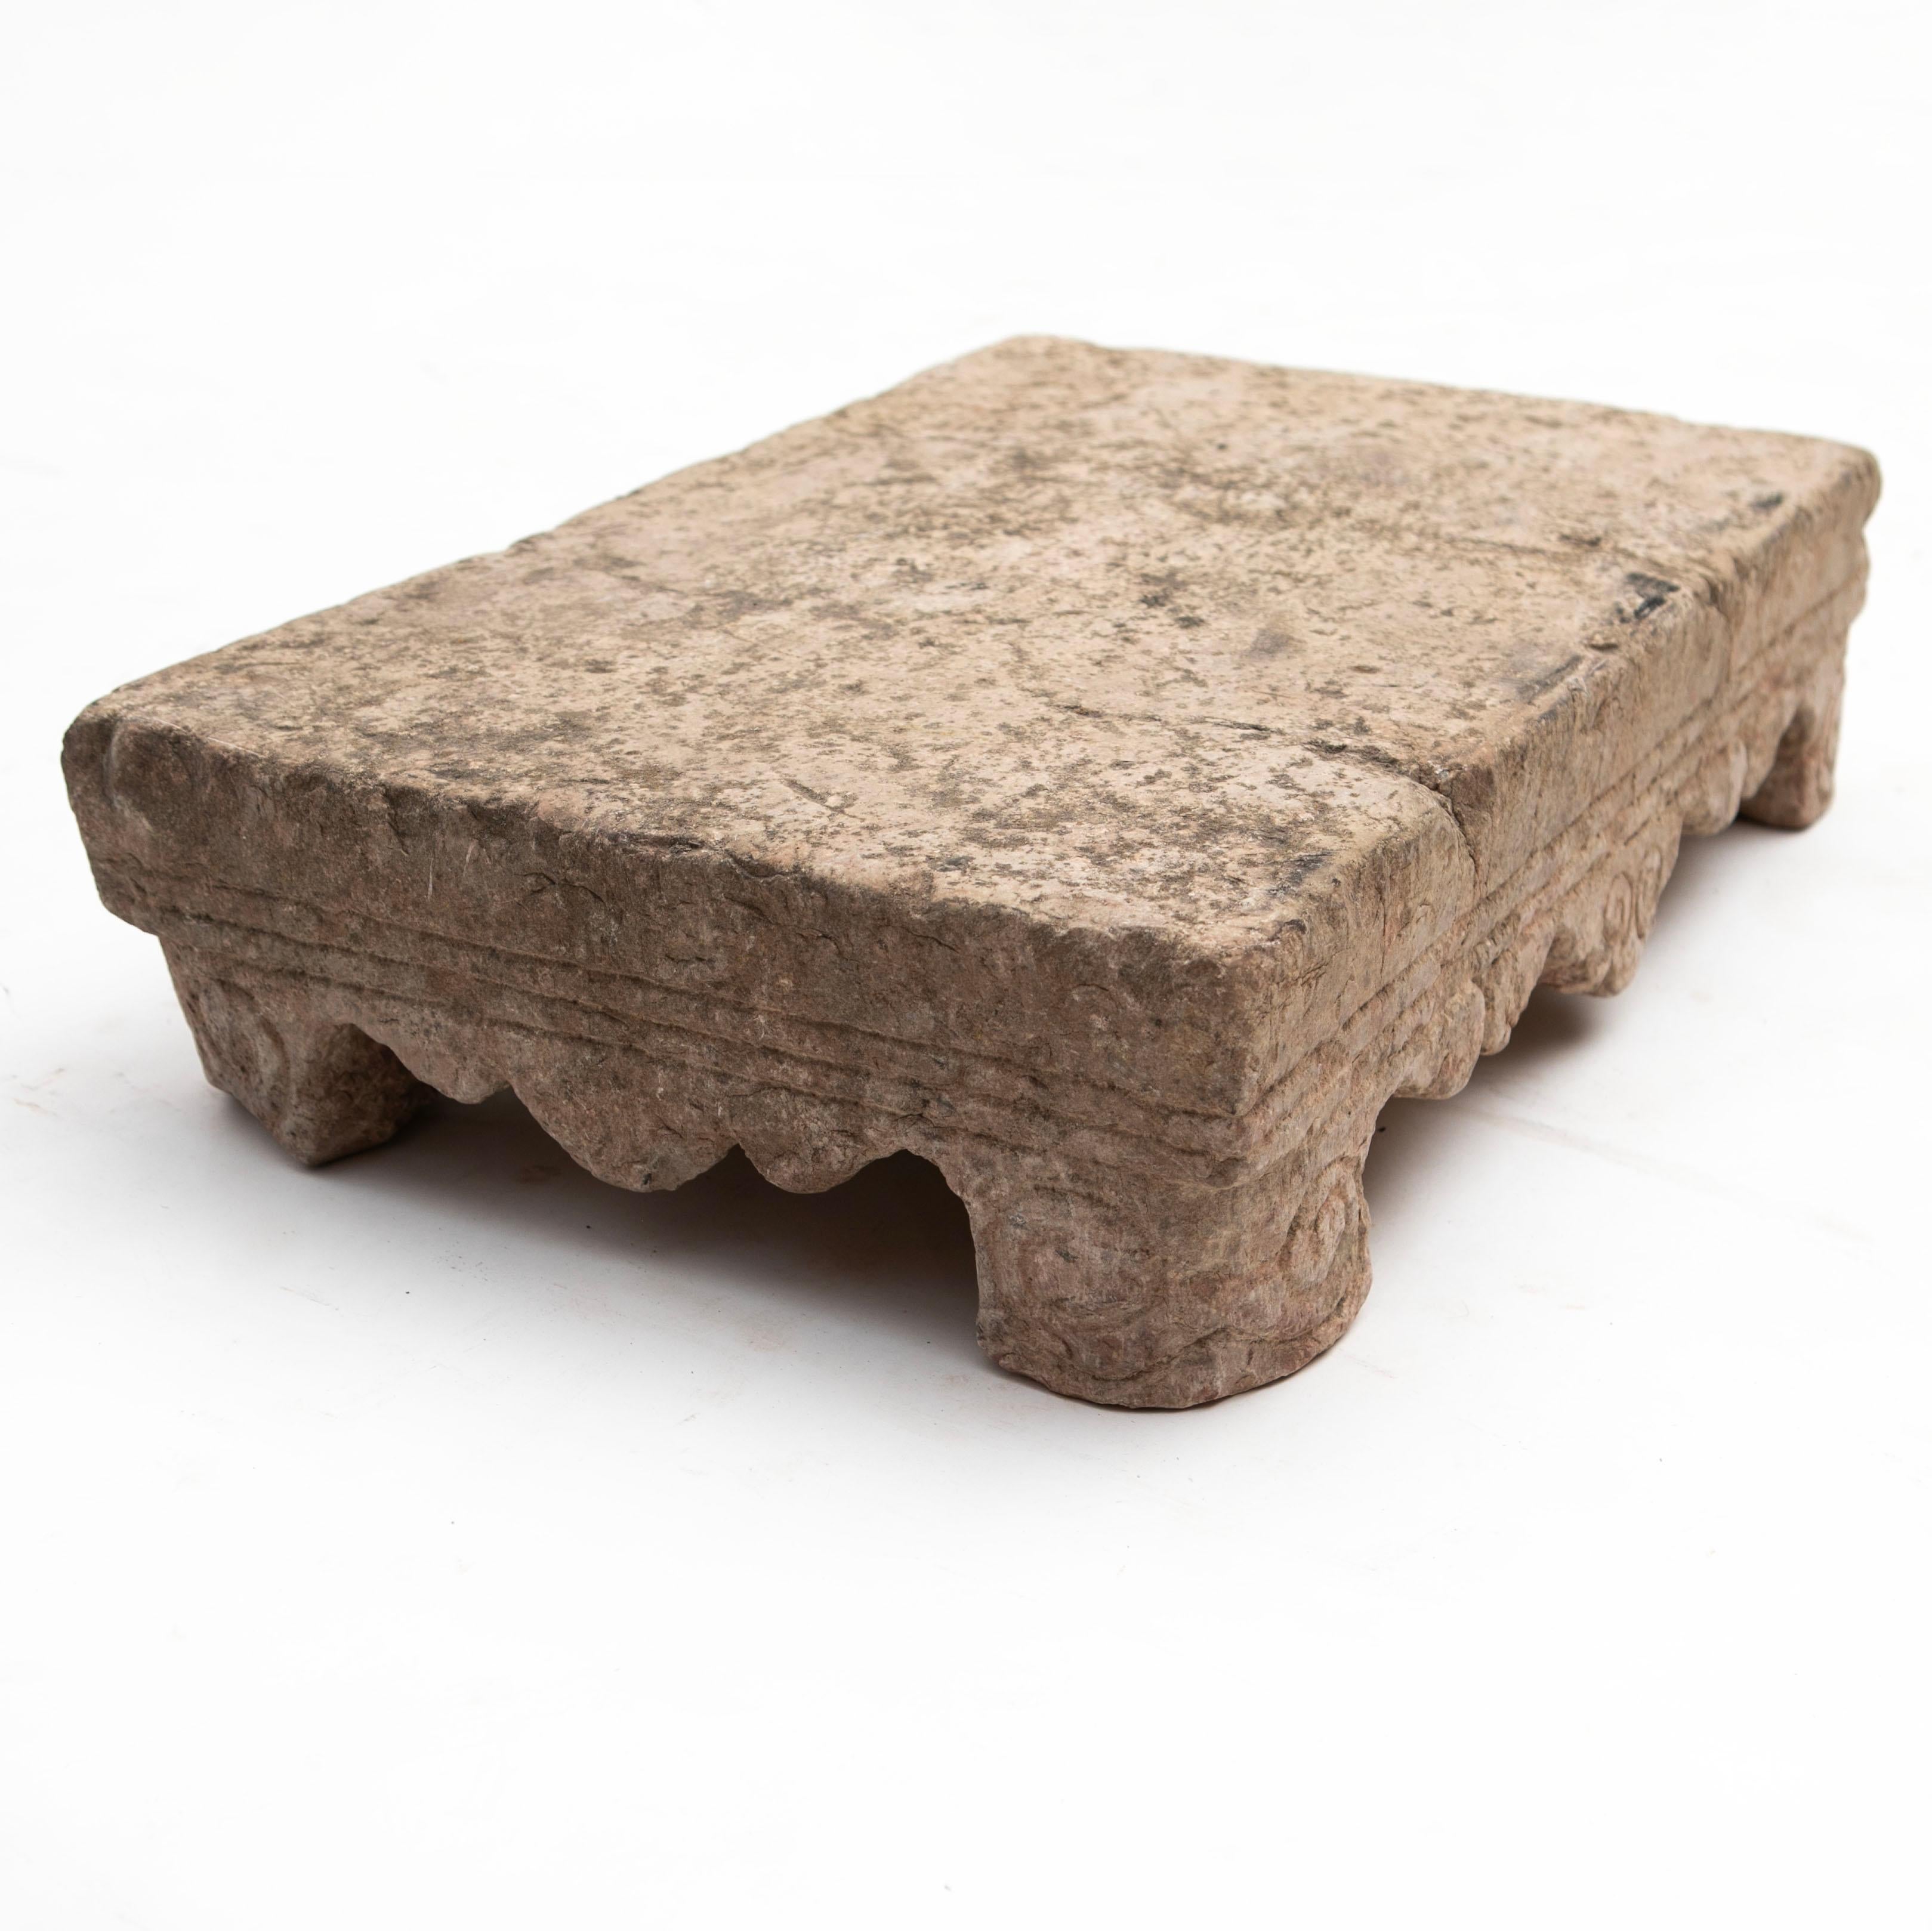 A Chinese 16-17th century Ming stone table carved from a solid piece of stone. This table has a traditional scalloped apron and legs ending in scrolled feet.

In well-preserved original condition with natural patina, it serves as an ideal pedestal